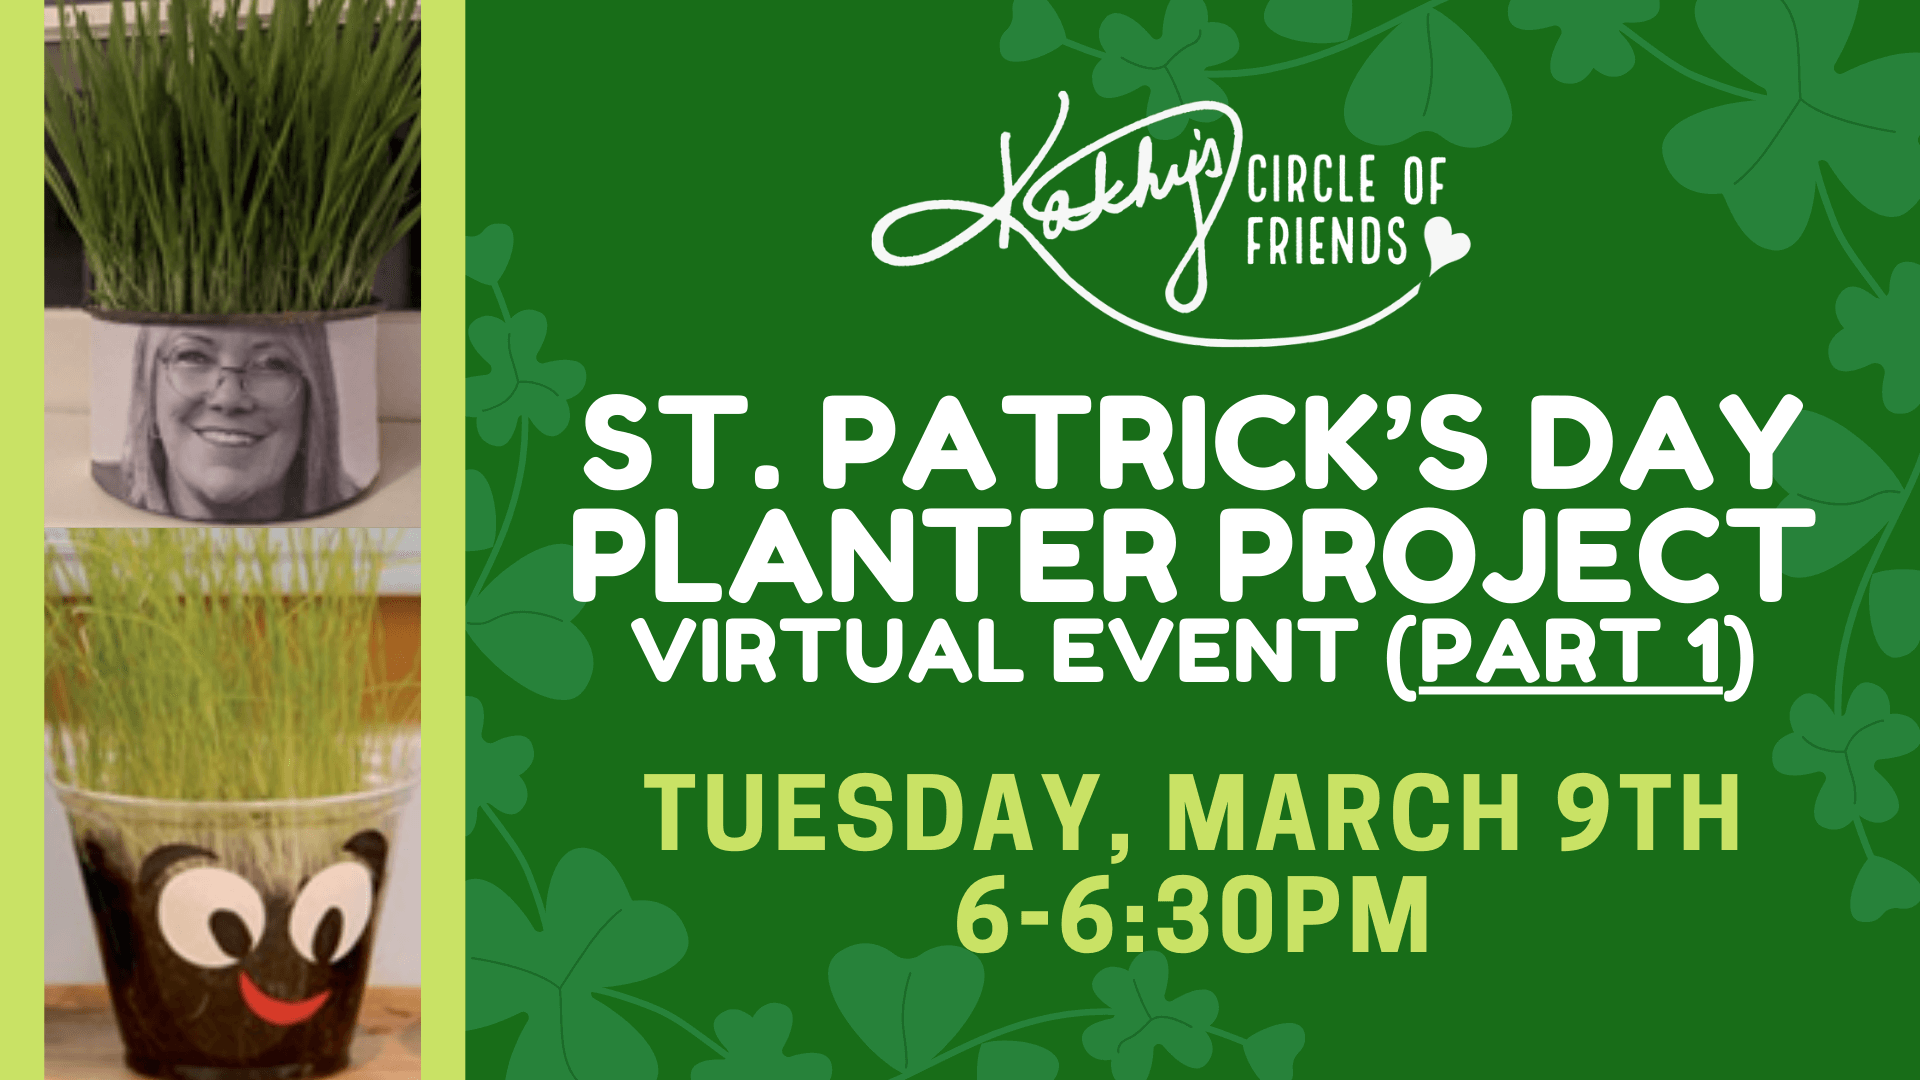 St. Patrick's Day Planter Project | Tuesday March 9th